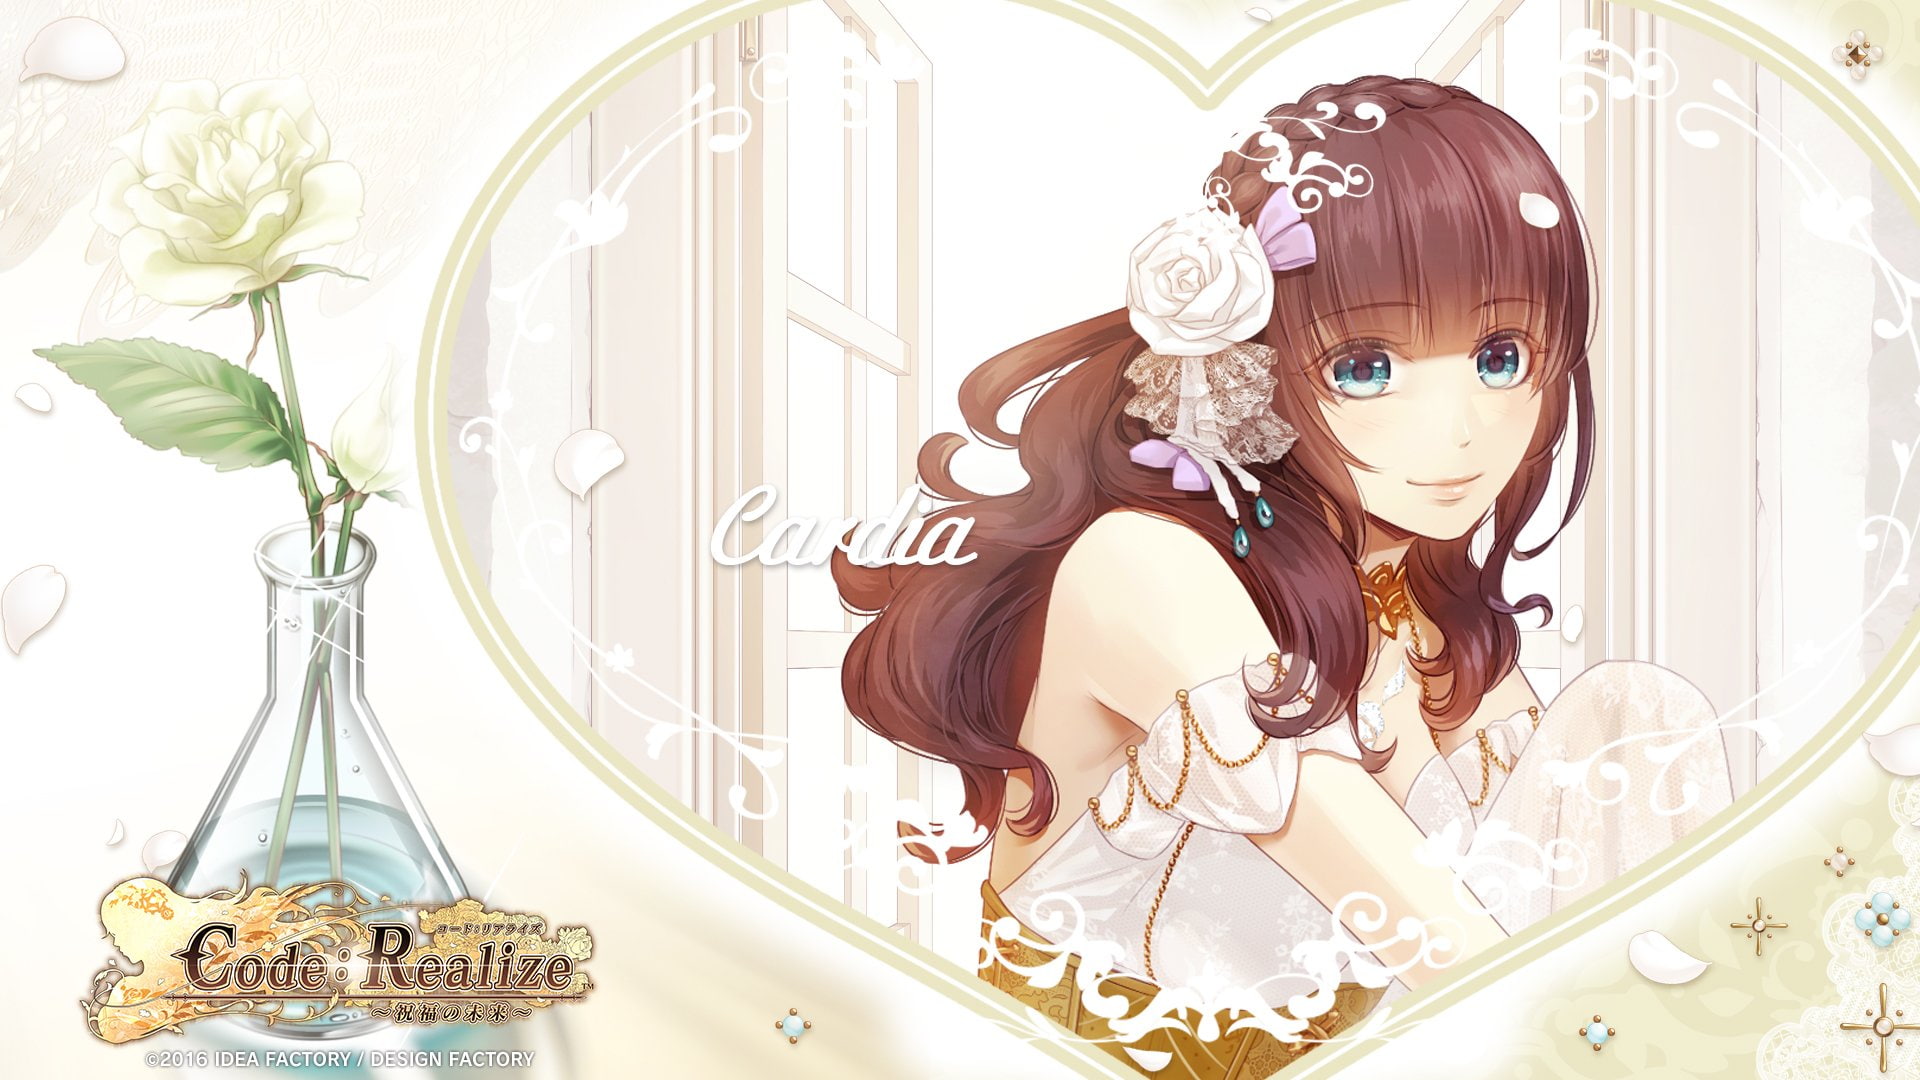 Video Game, Code: Realize, Cardia (Code: Realize)